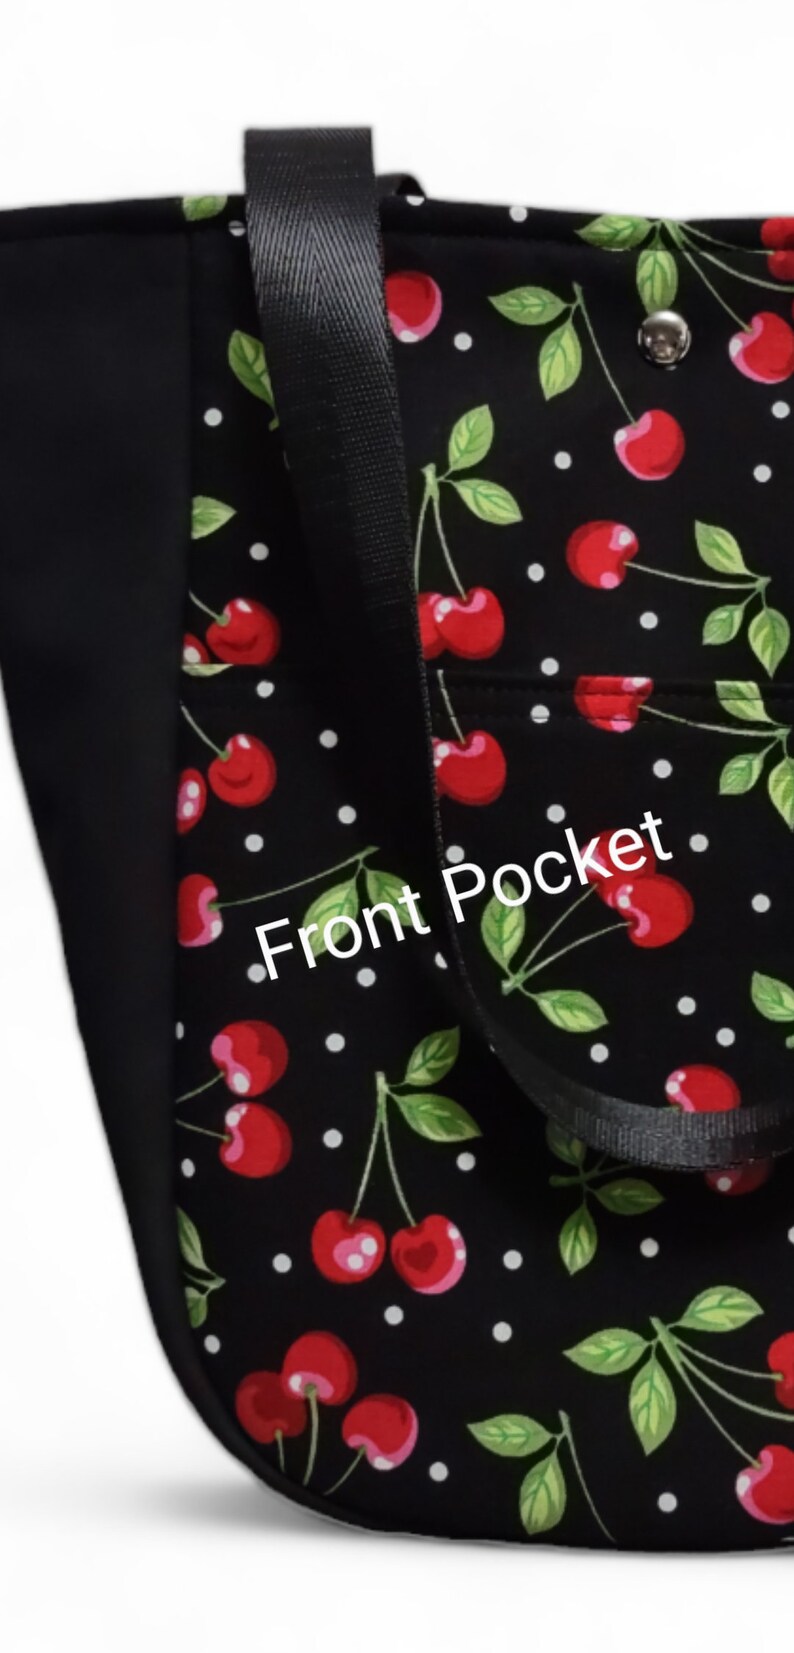 Small Cherry Tote / Red Cherries Purse / Cherry Project Bag / Small Shoulder Bag Tote / Cherry Lover Gift image 3